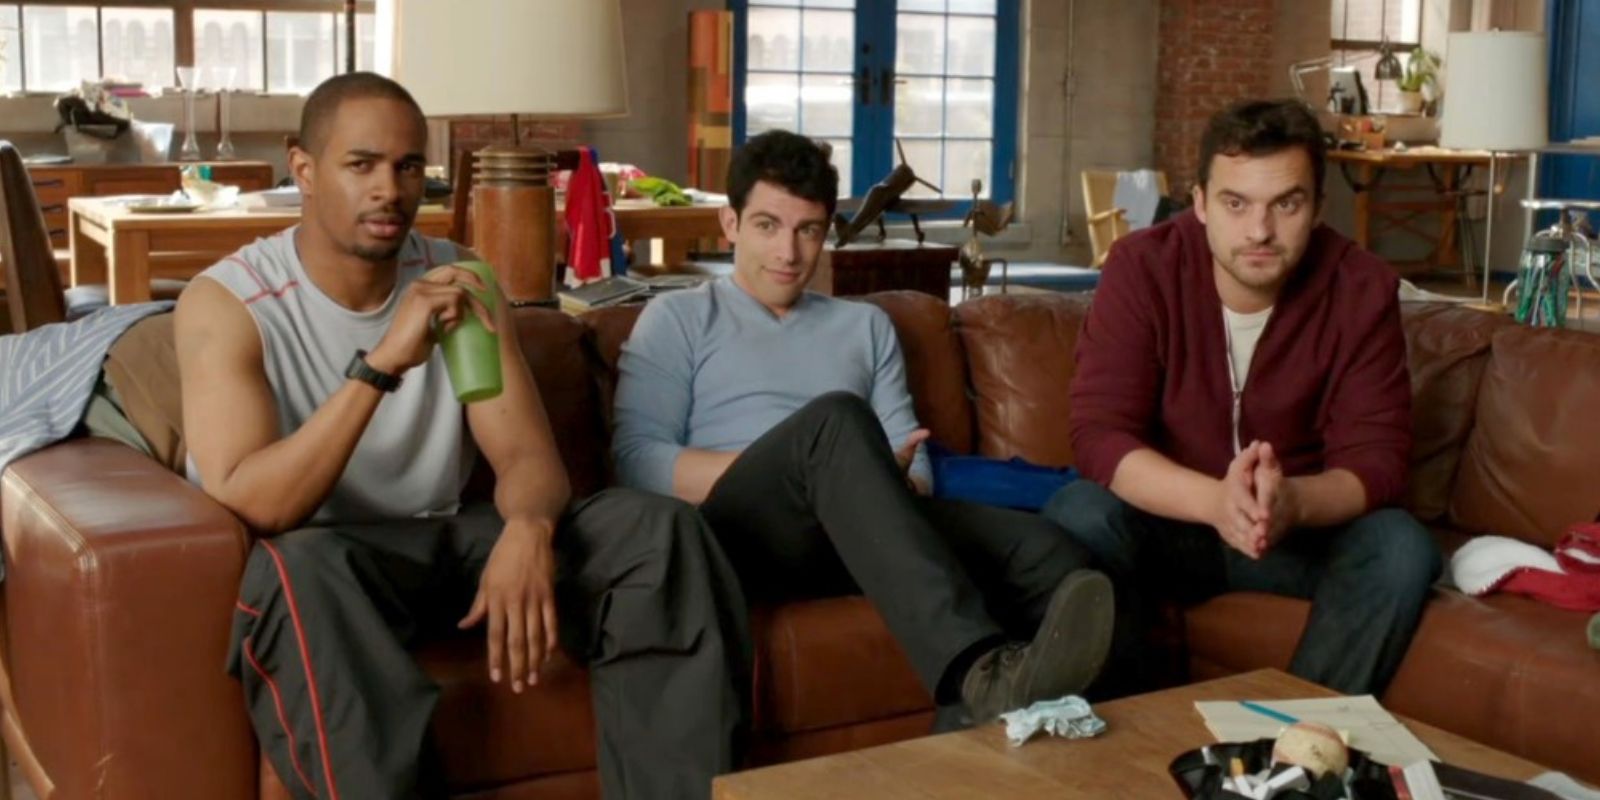 Coach, Schmidt, and Nick sit on the couch in the loft as they question Jess in the New Girl pilot episode